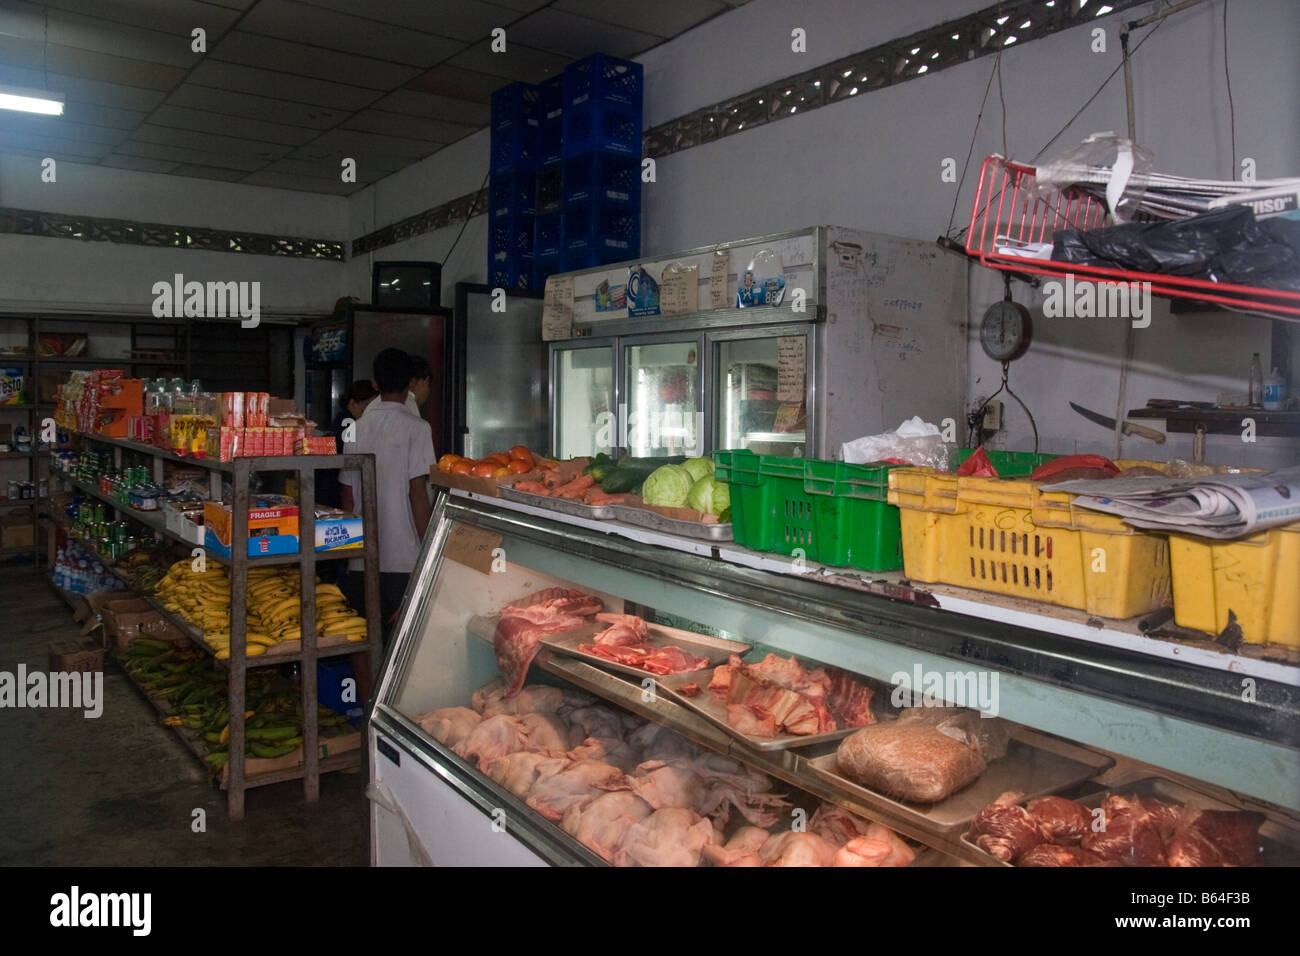 Poor hygiene conditions at a rural store in Panama City, Republic of Panama, Central America Stock Photo